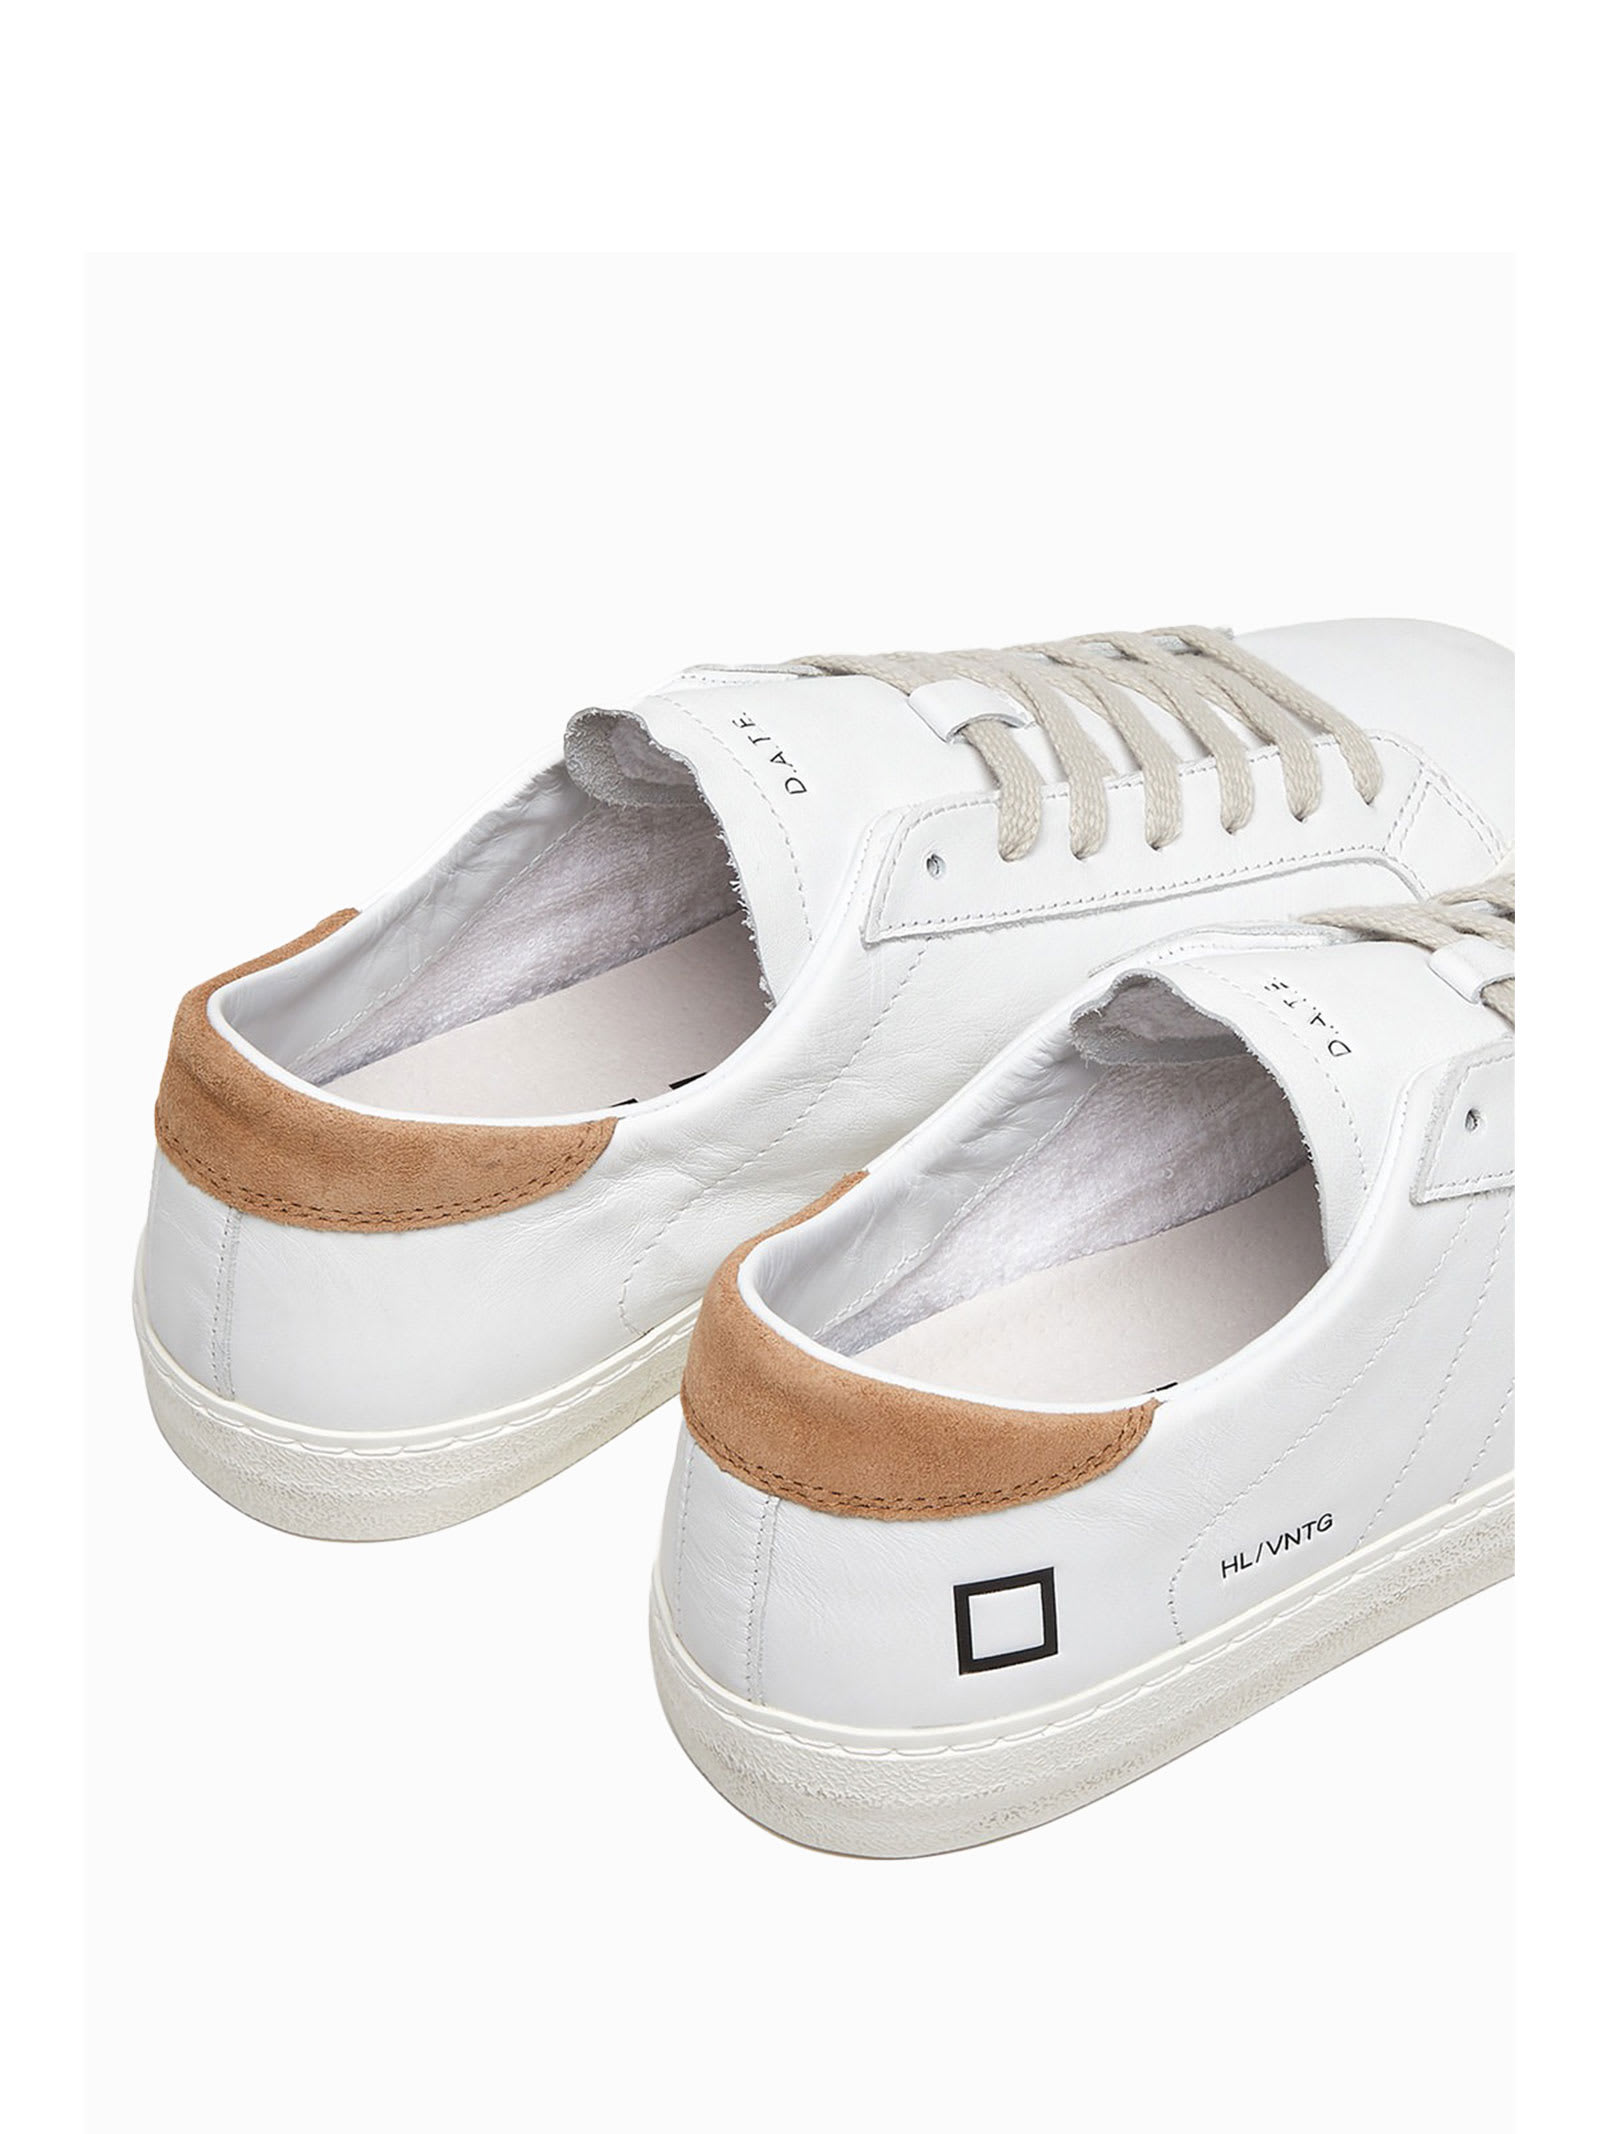 Shop Date Hill Low Vintage Mens Sneaker In Leather In White Rust